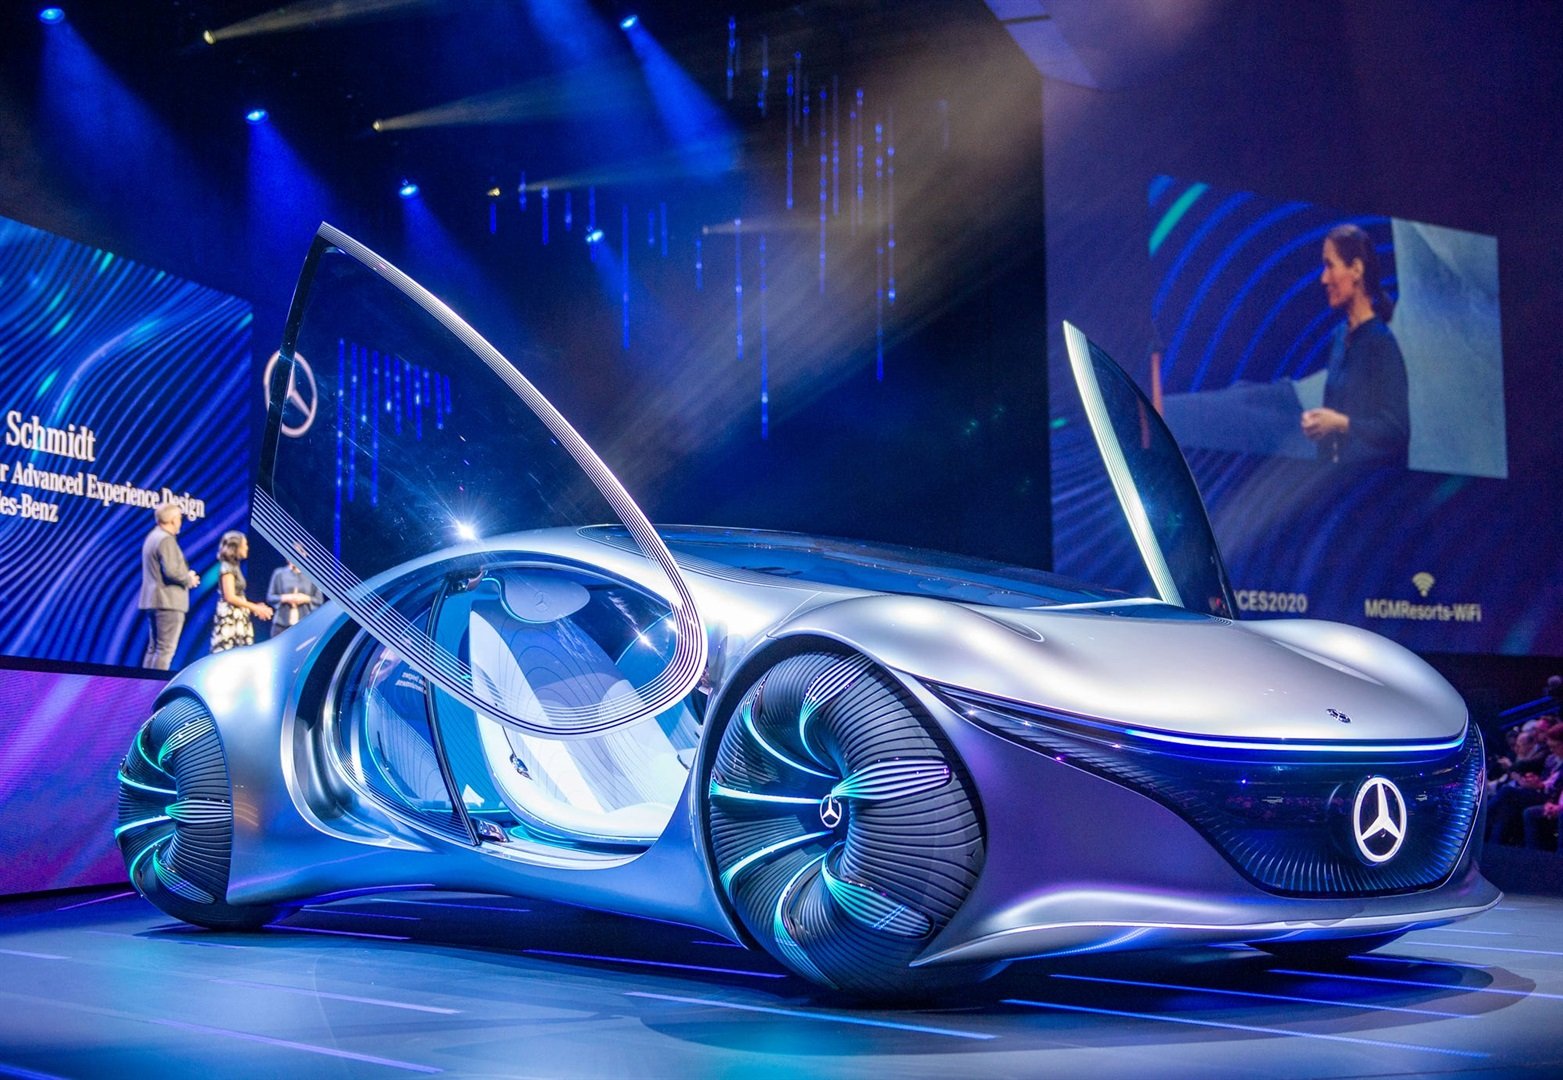 Watch Mercedes-Benz's 'Avatar'-inspired concept car drive without a